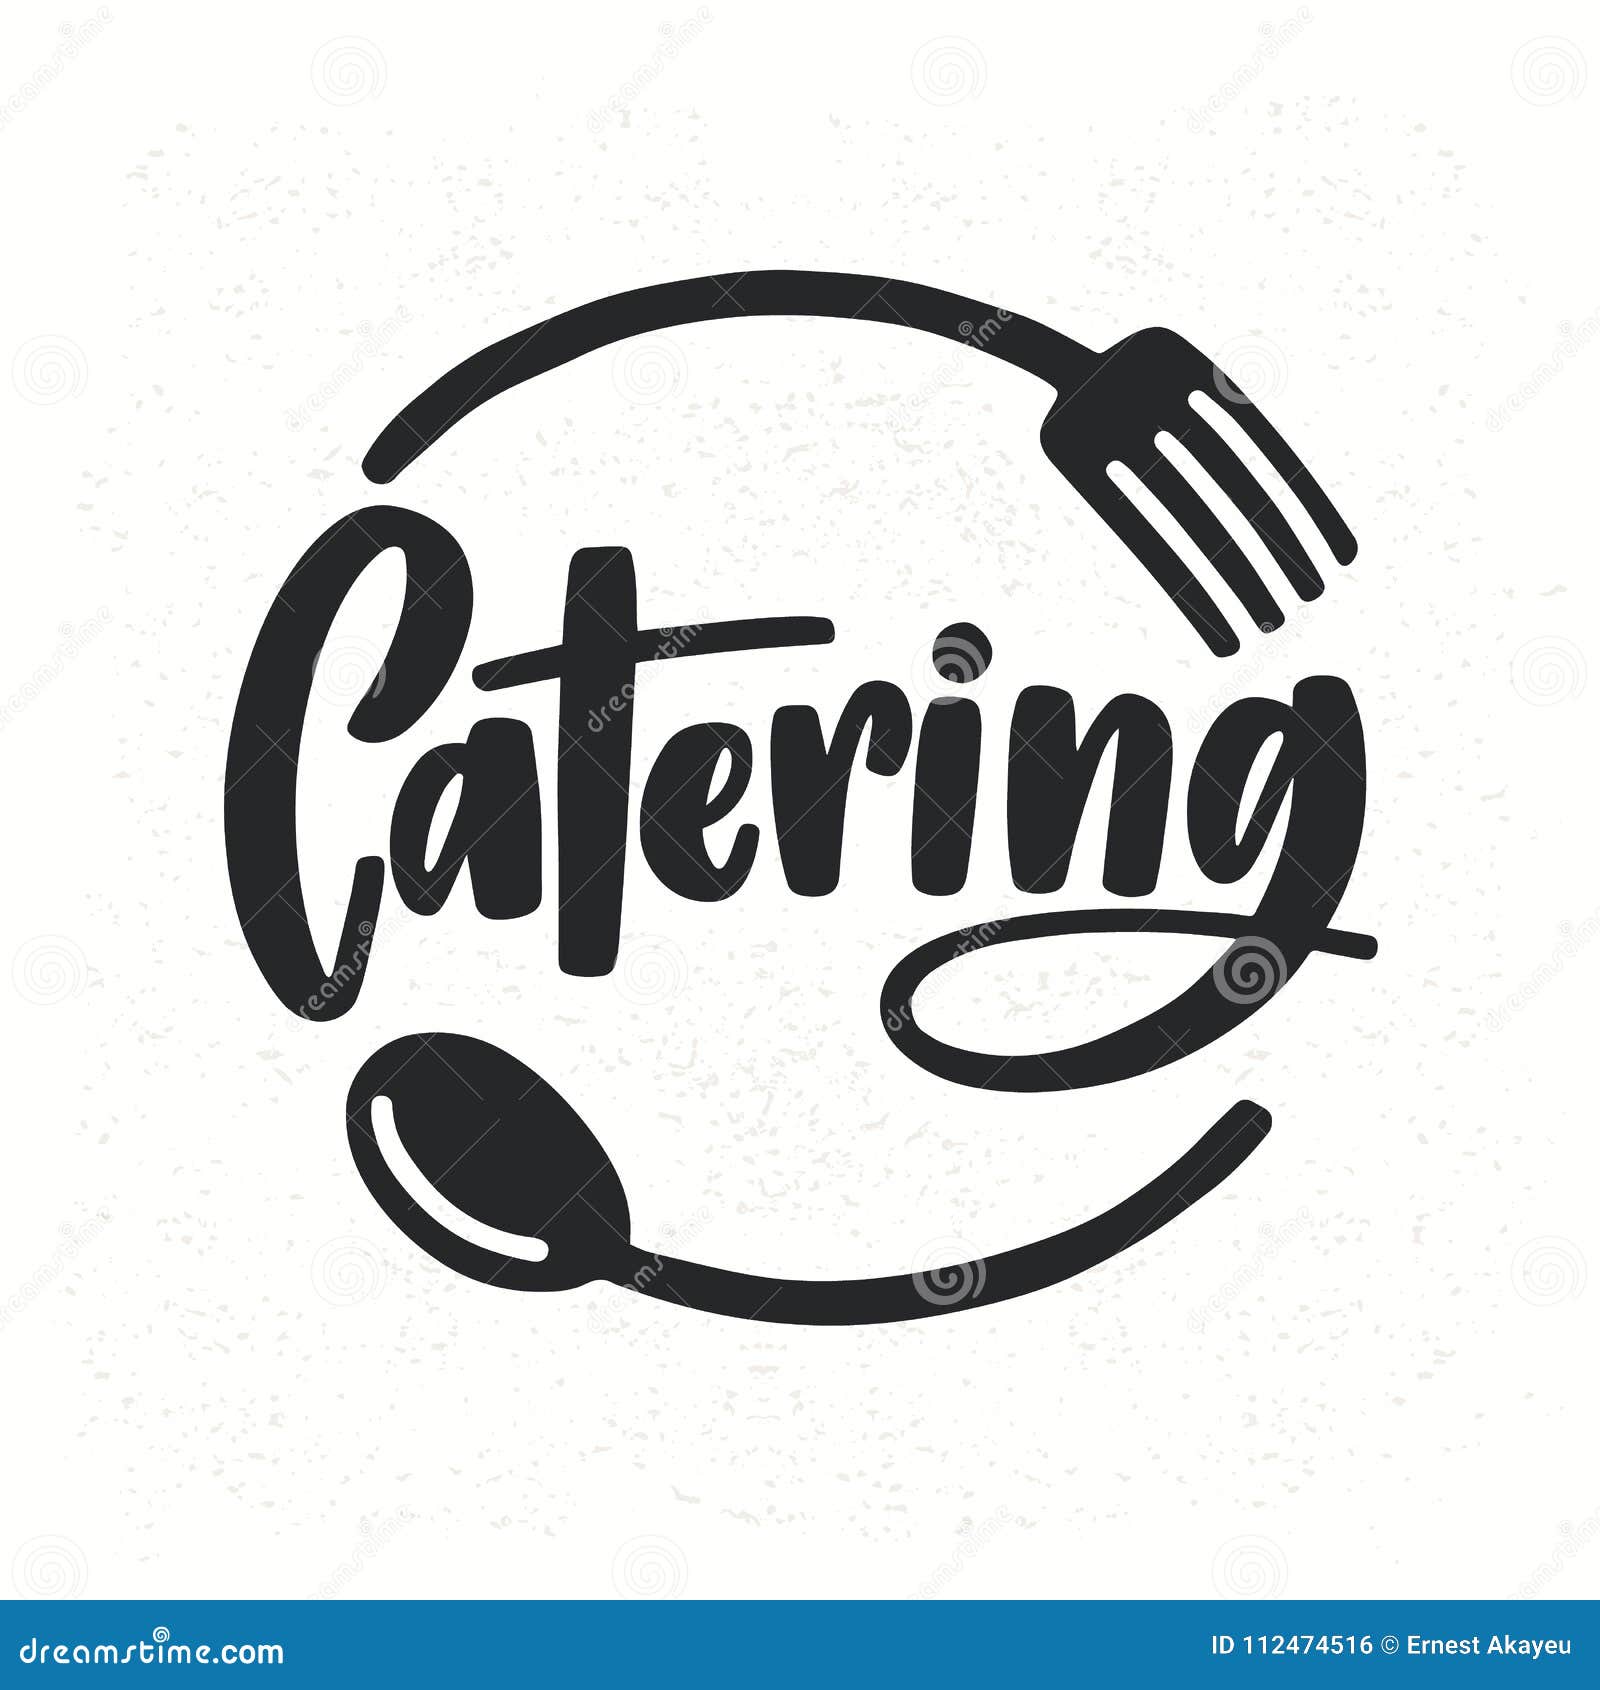 catering company logotype with lettering written with calligraphic cursive font decorated with cutlery or kitchenware